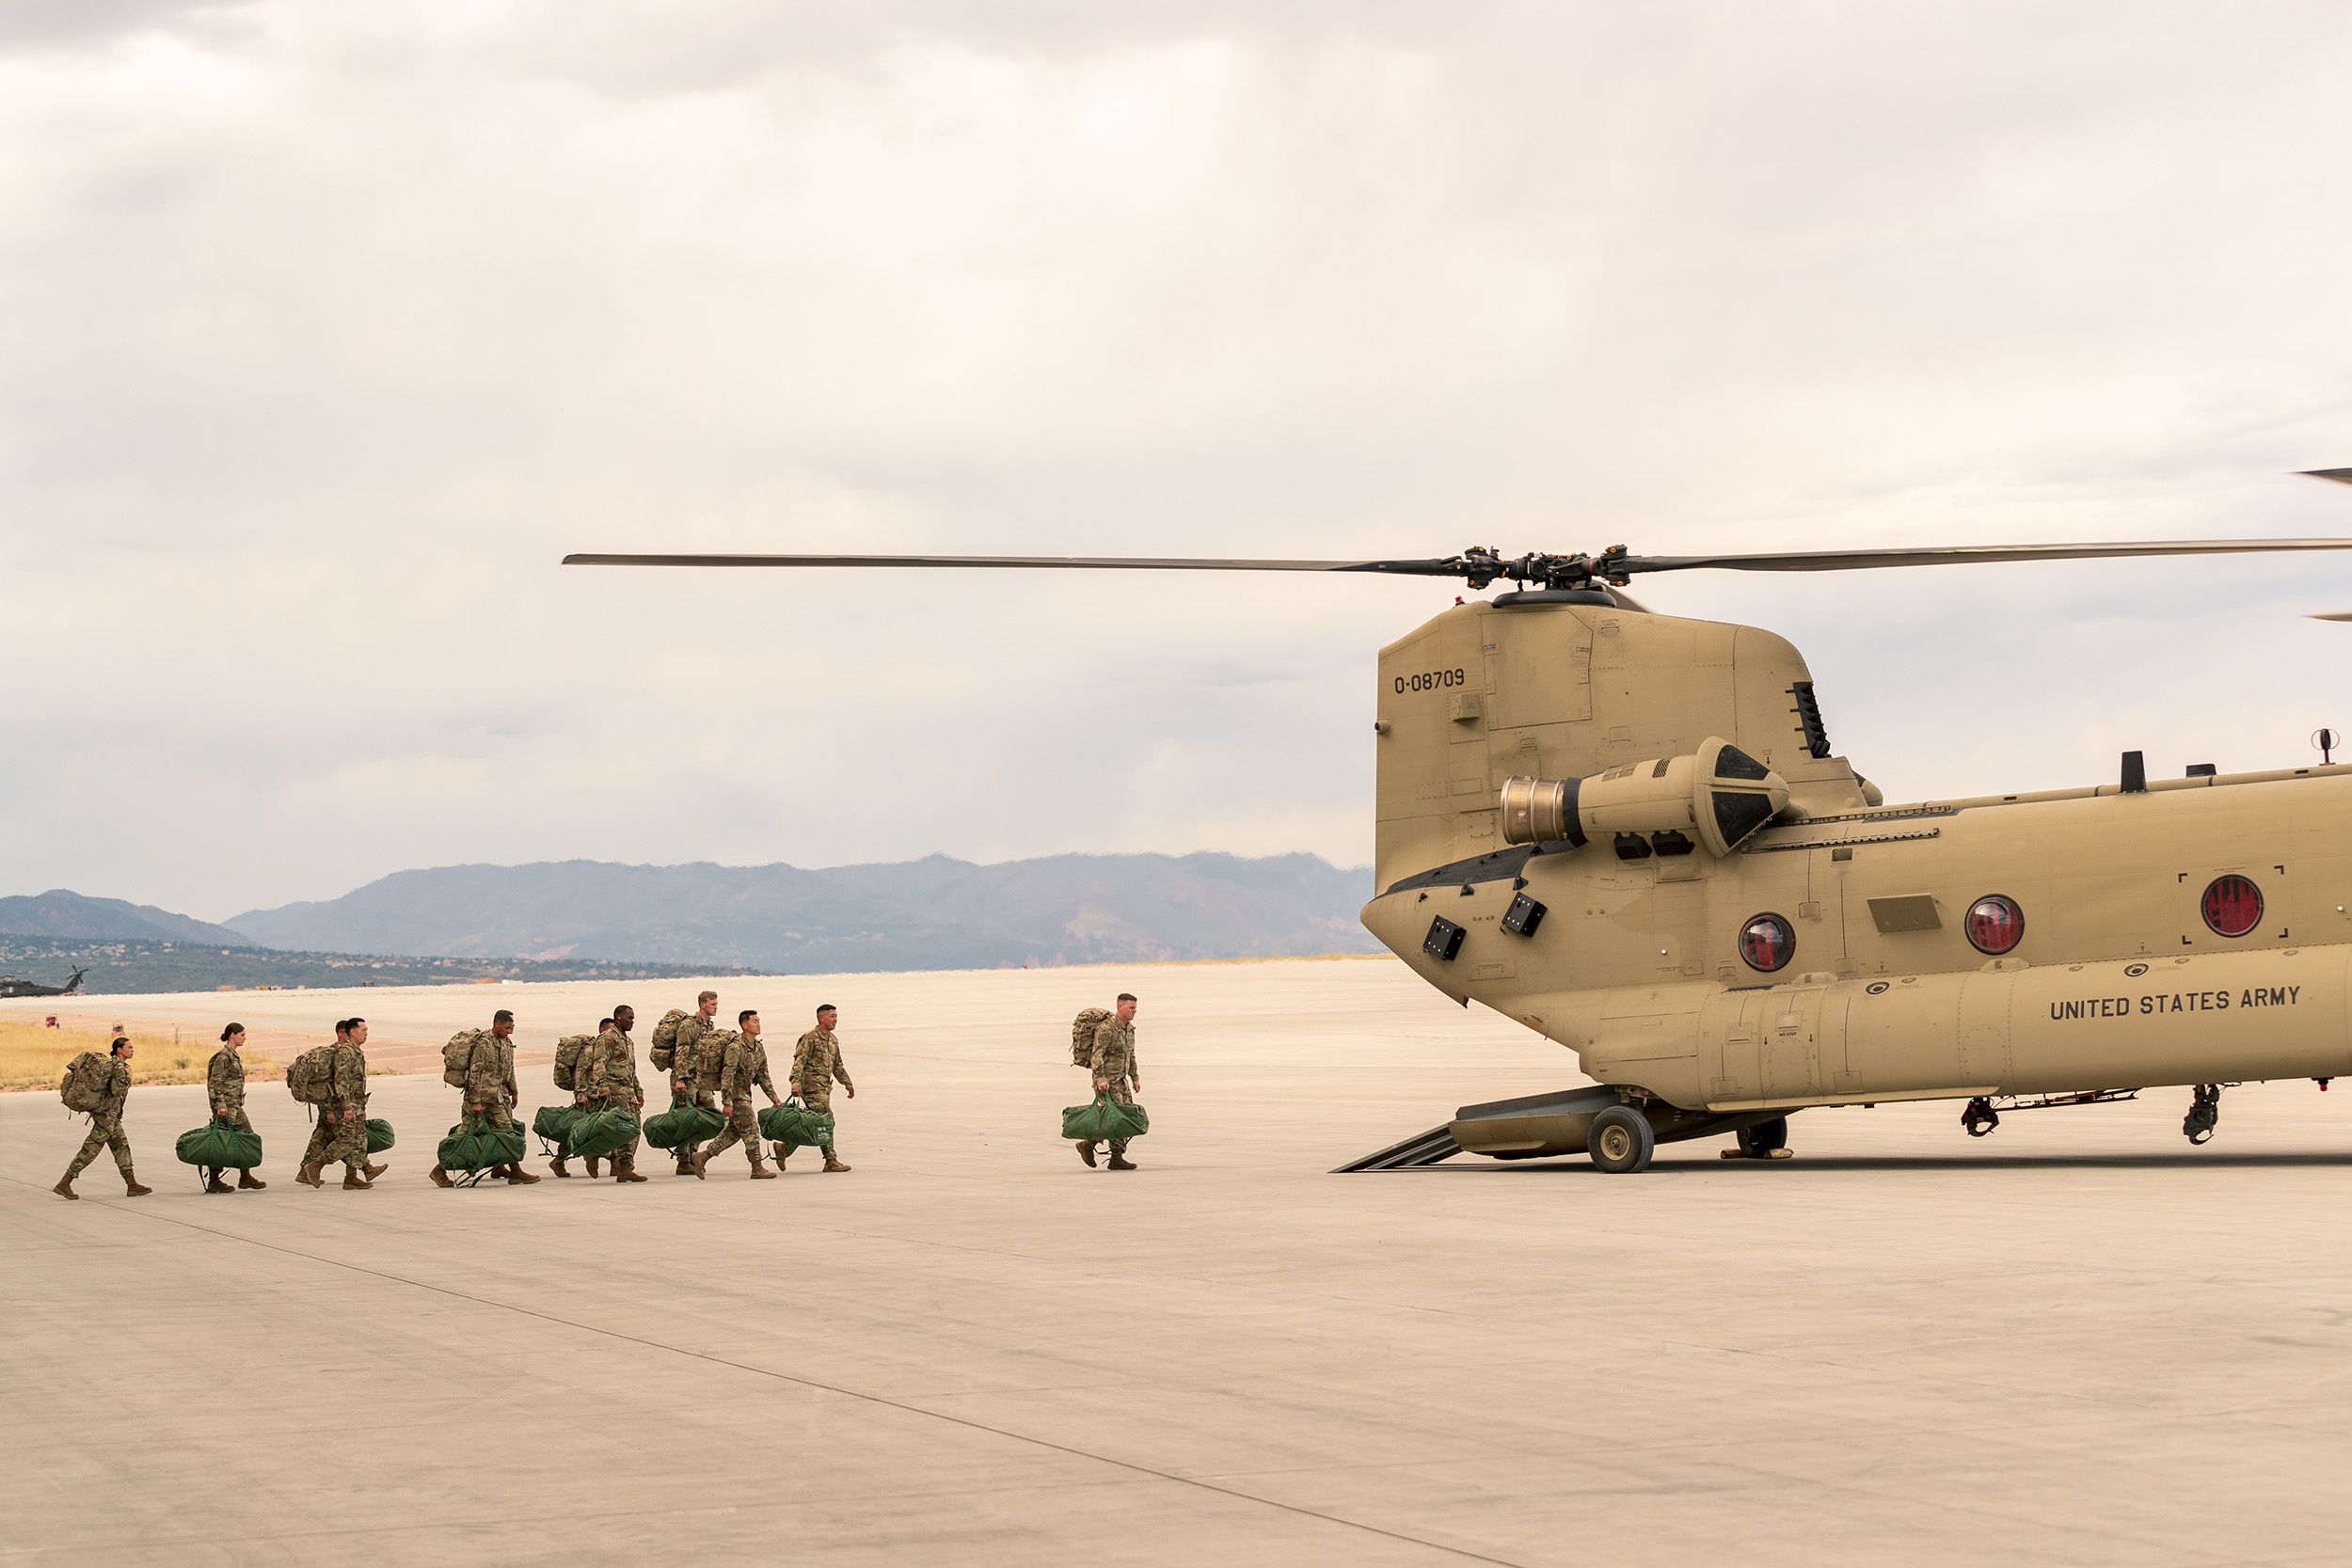 Soldiers loading in Chinook Helicopter on Army Base US Army Advertising